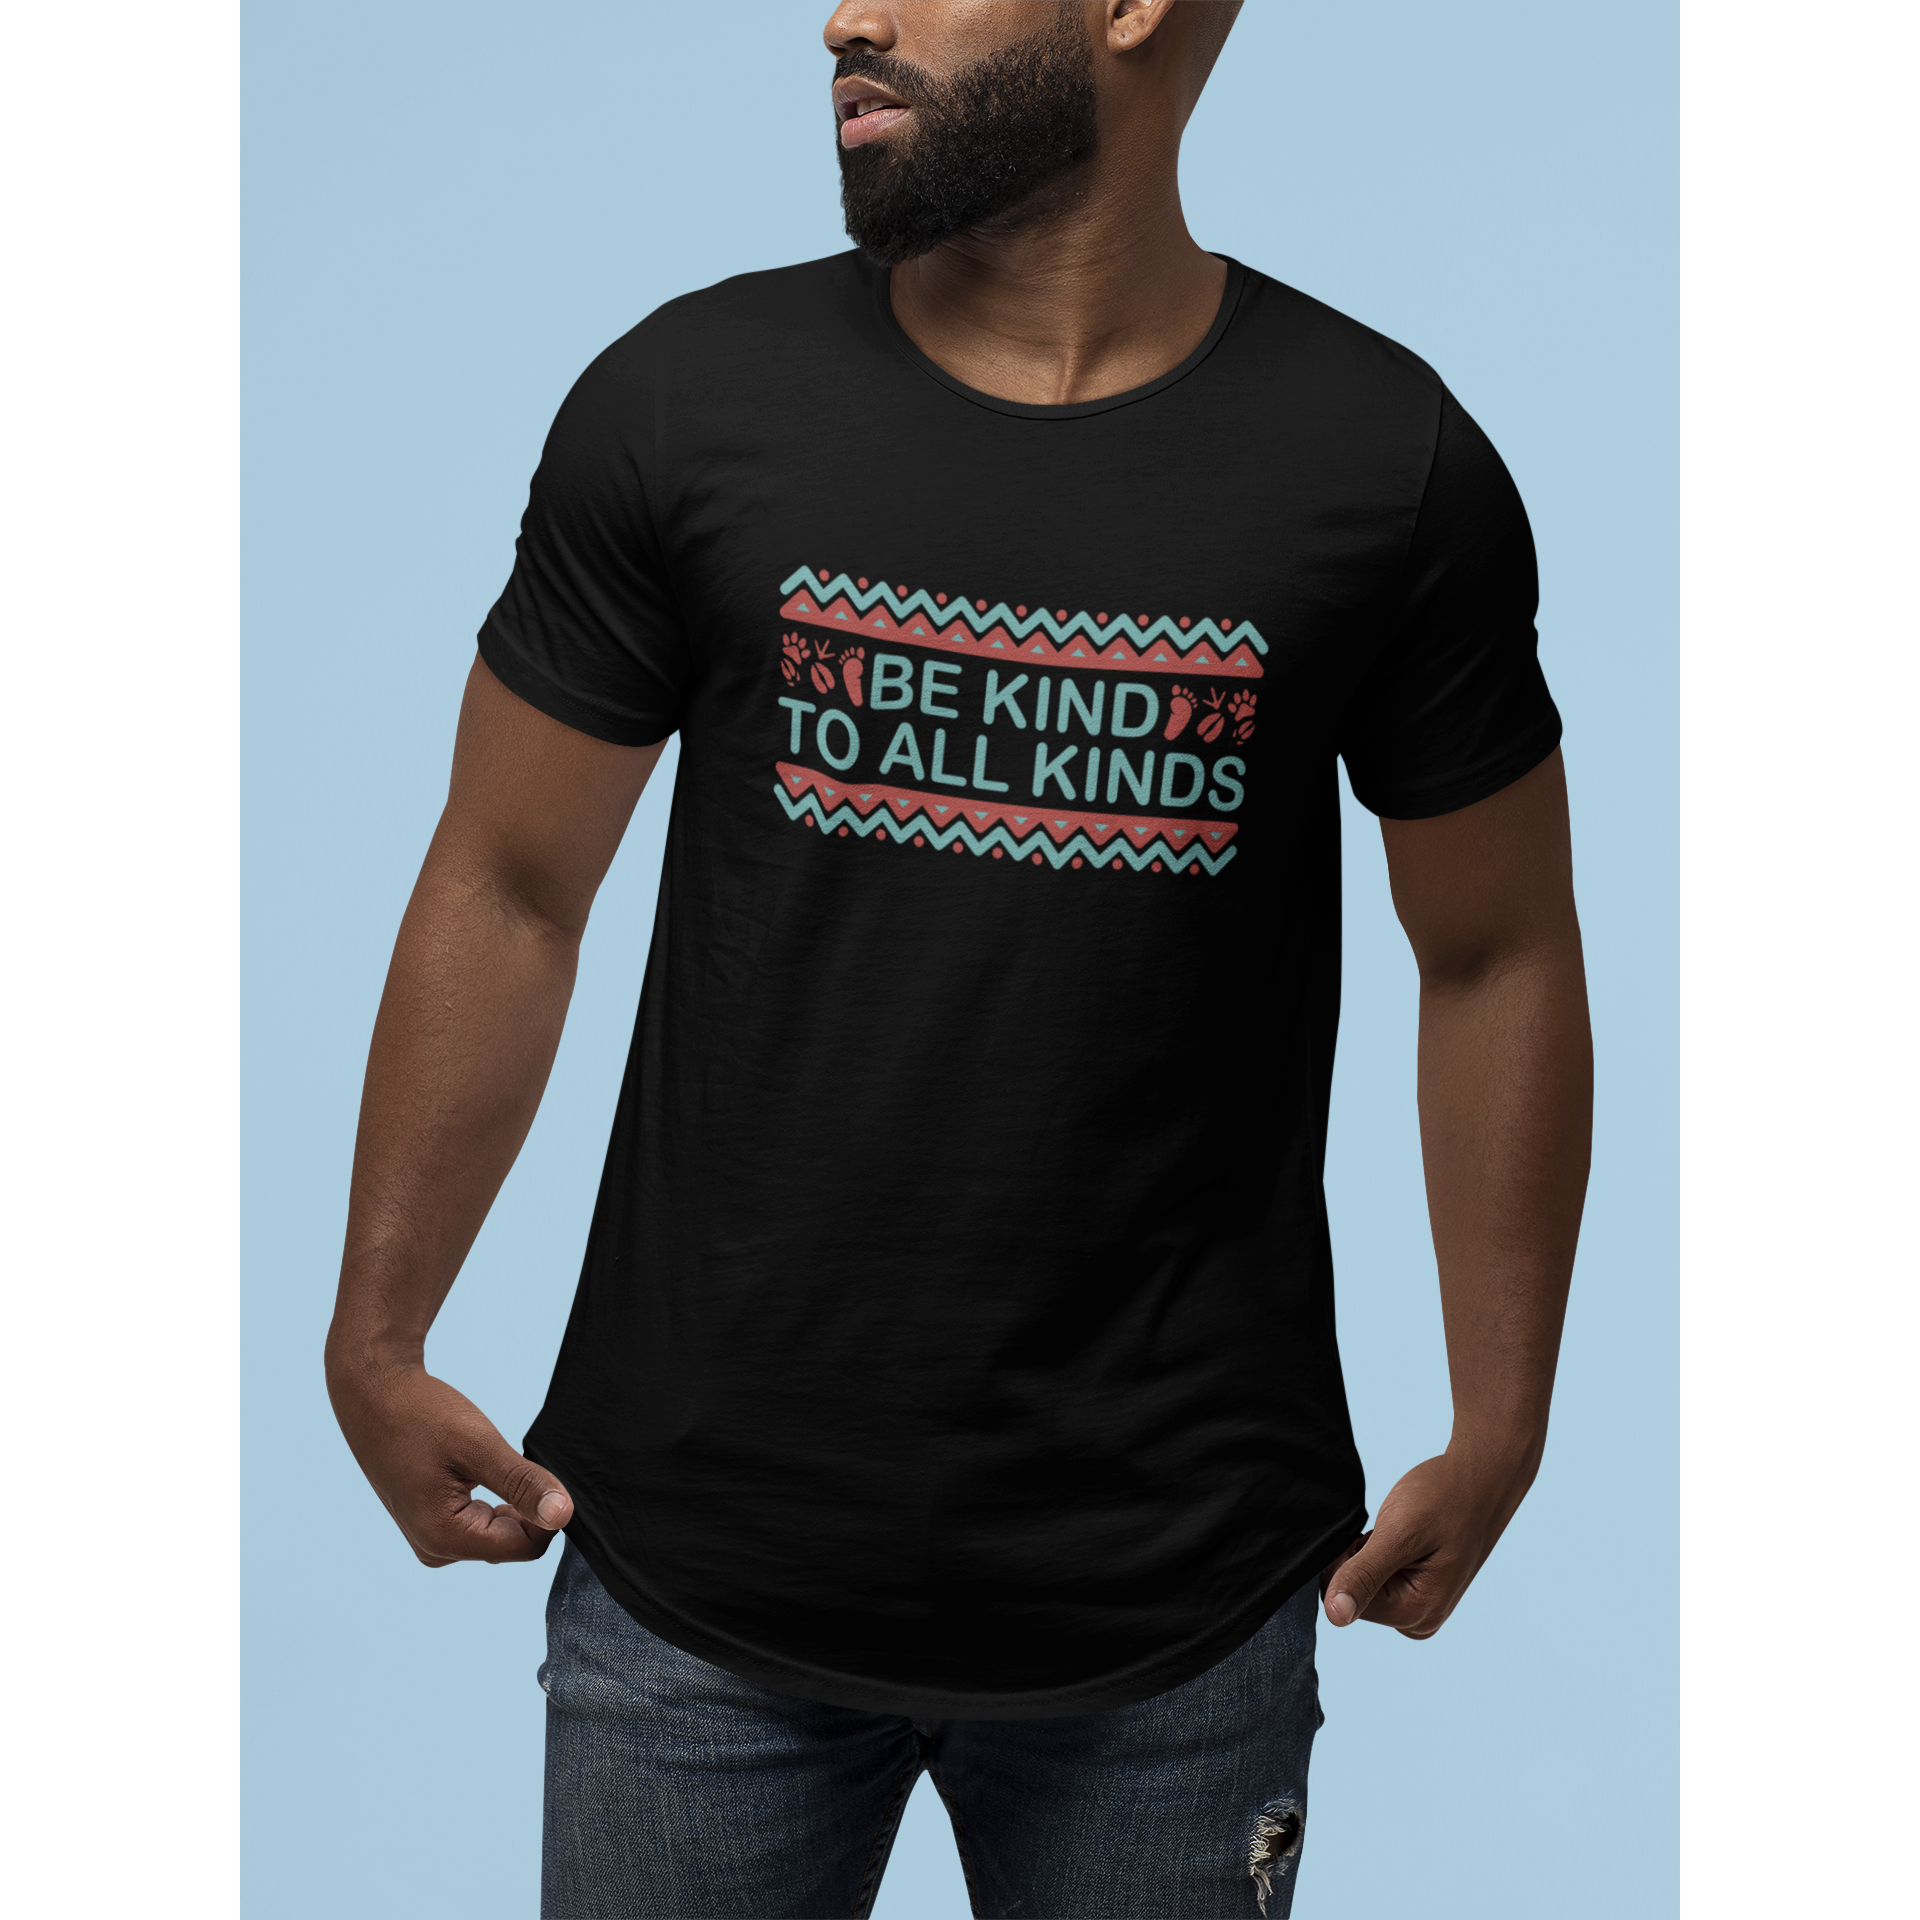 man wearing "be kind to all kinds" boho style black vegan t shirt made for boho tops